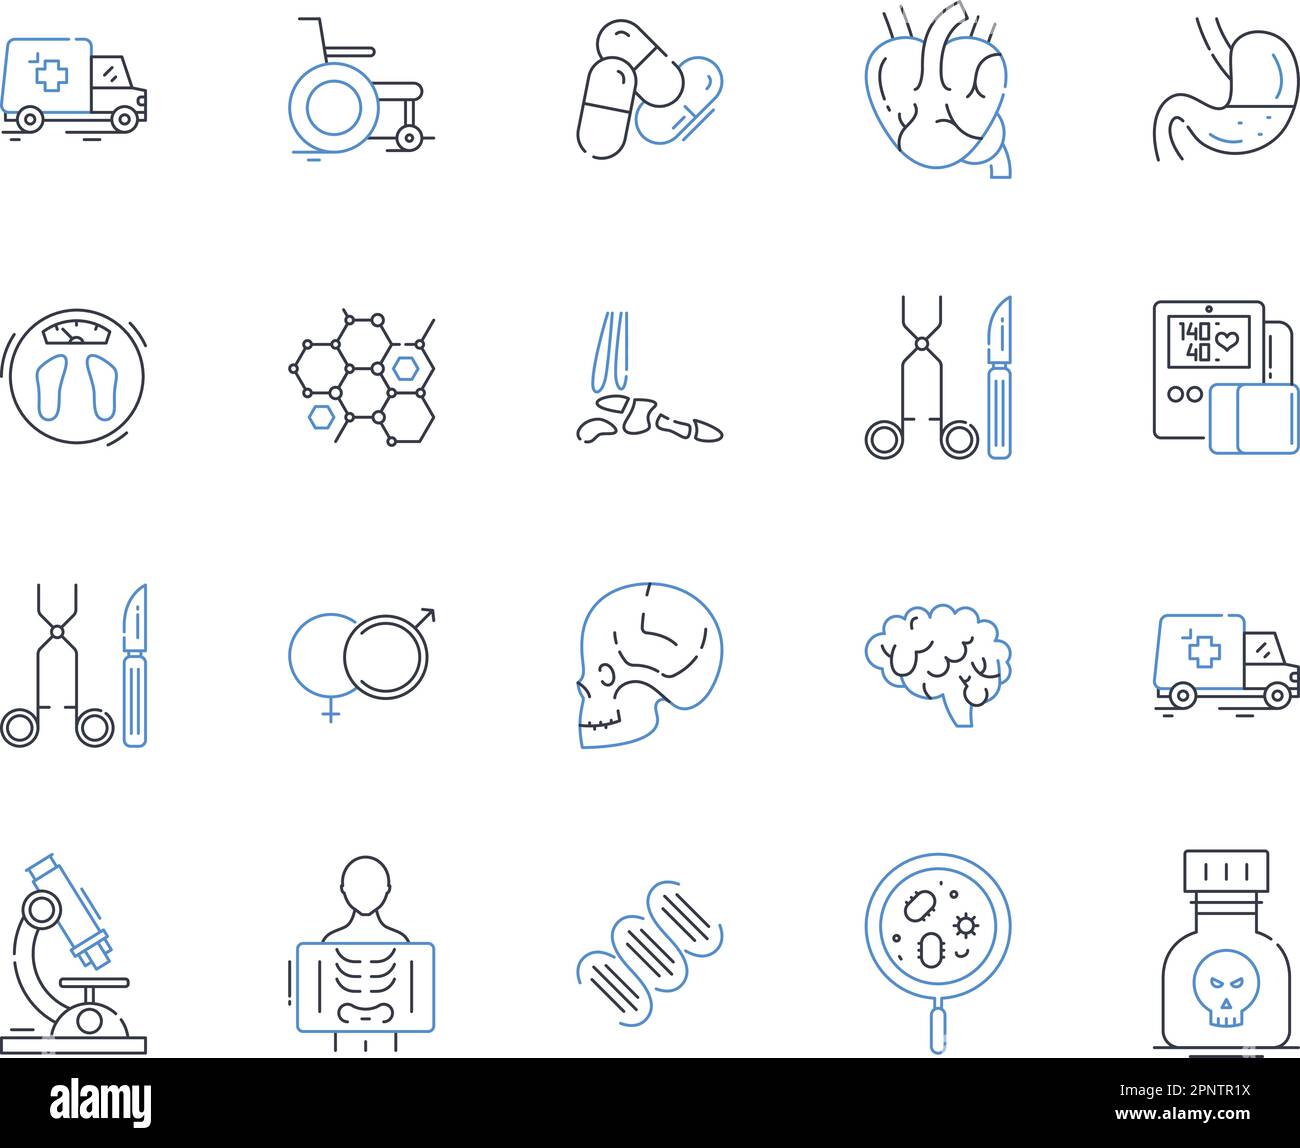 Moxibustion line icons collection. Therapy, Heat, Acupoints, Treatment, Traditional, Herb, Medicinal vector and linear illustration. Therapy,Stimulate Stock Vector